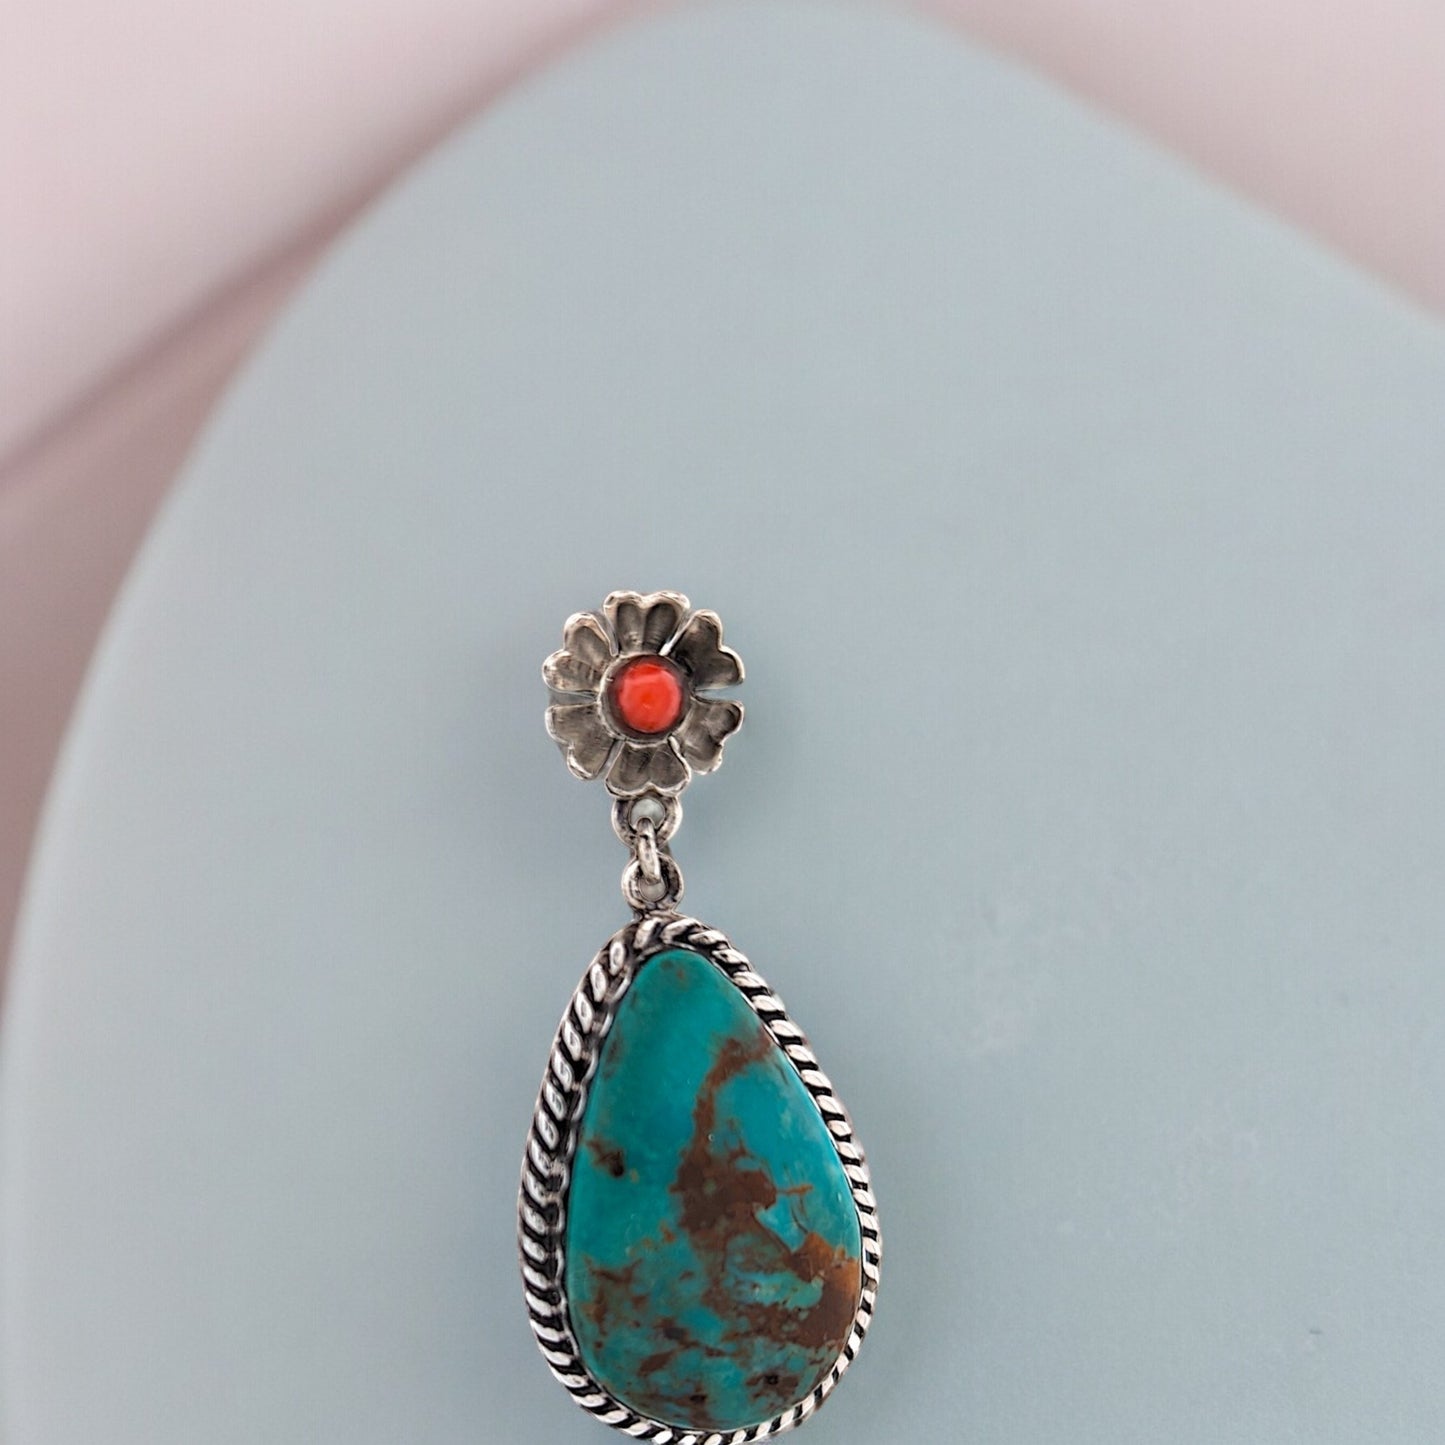 Prospector Springs | Handcrafted Sterling Silver Earrings featuring Kingman Turquoise & Coral accents.